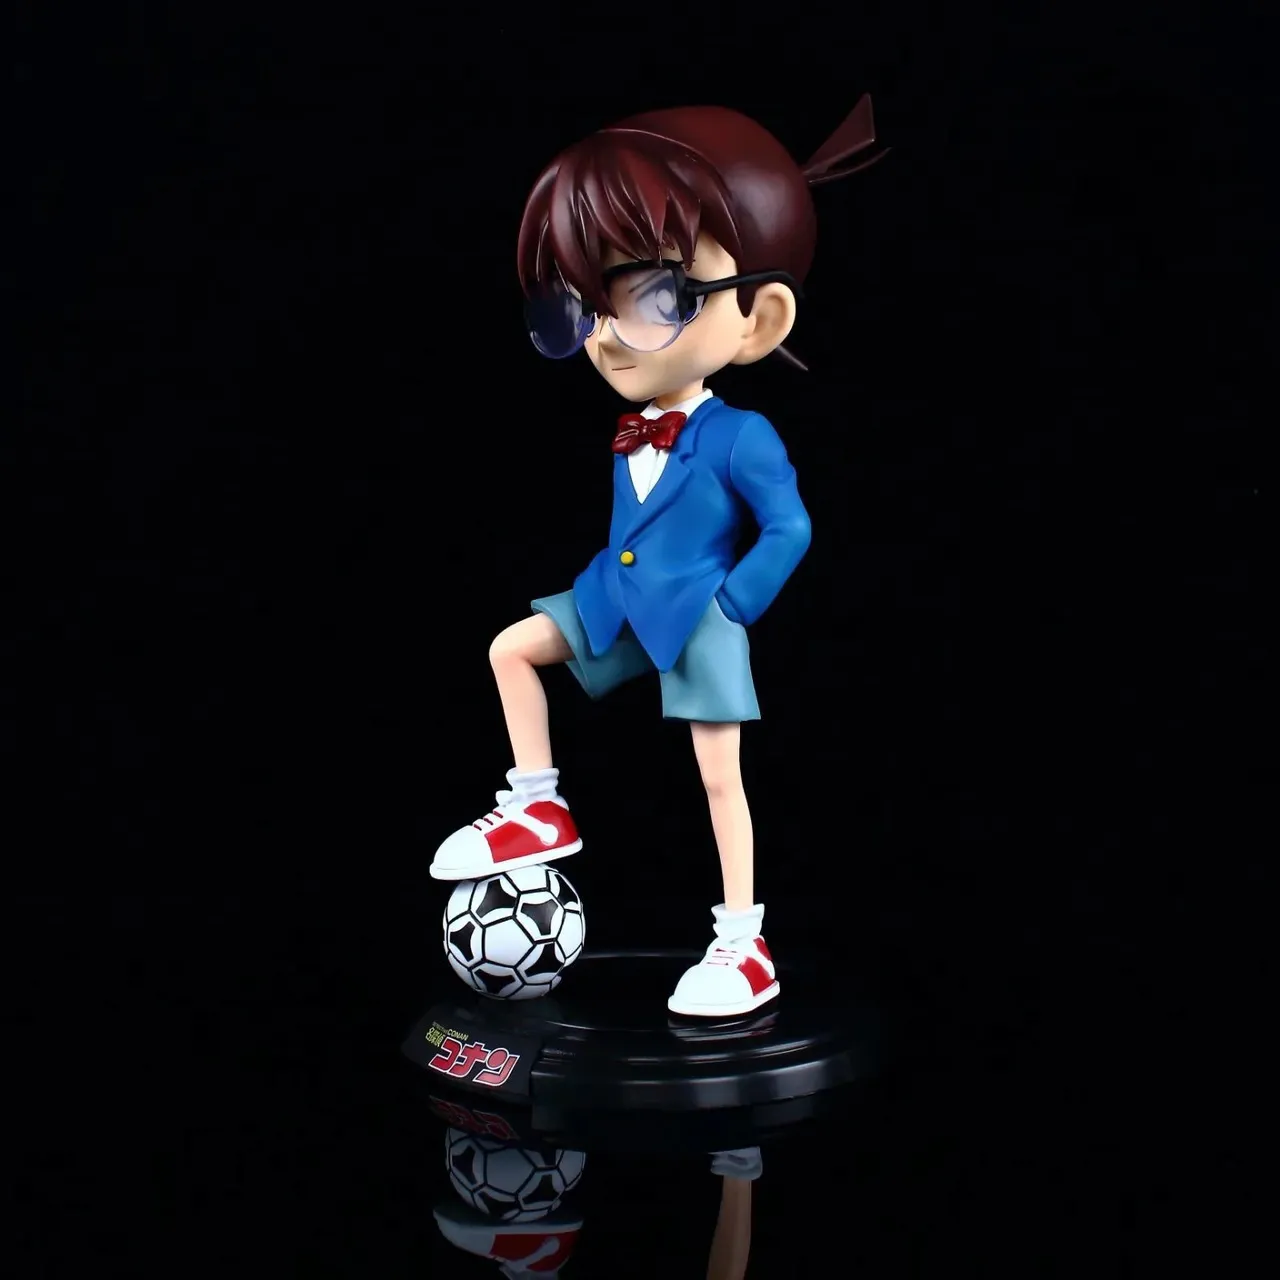 30cm Anime GK Detective Conan 1/4 action figure PVC model toy for gifts